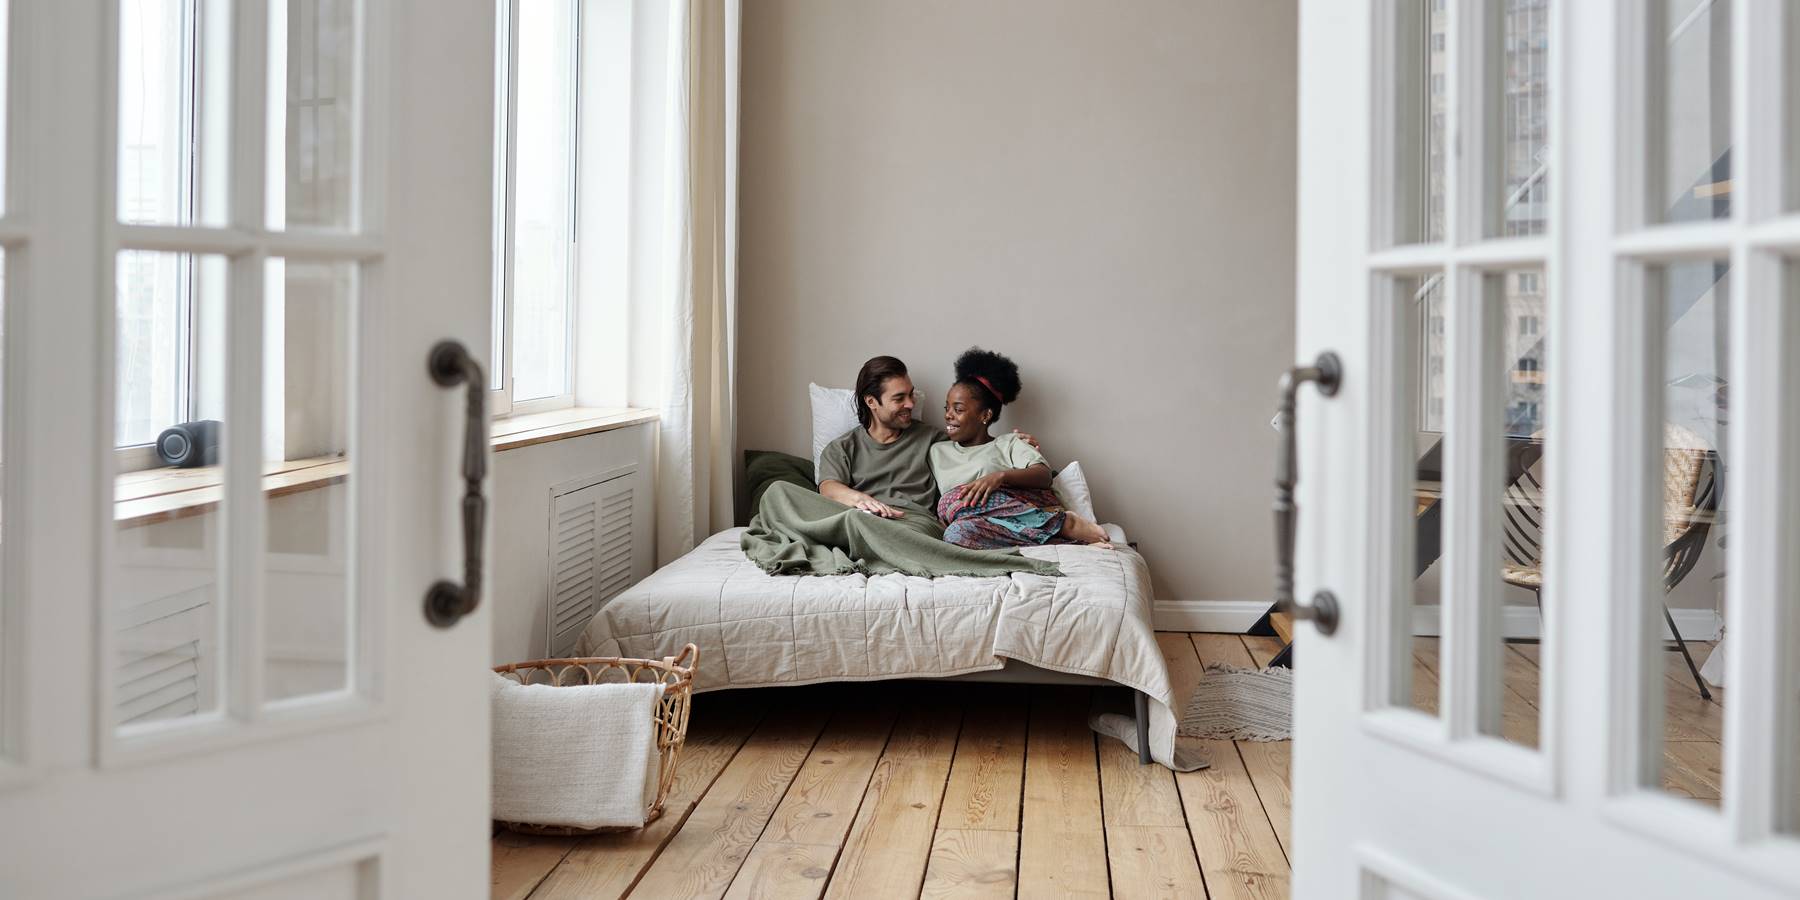 A couple lying in bed with doors open in bedroom with hardwood floors